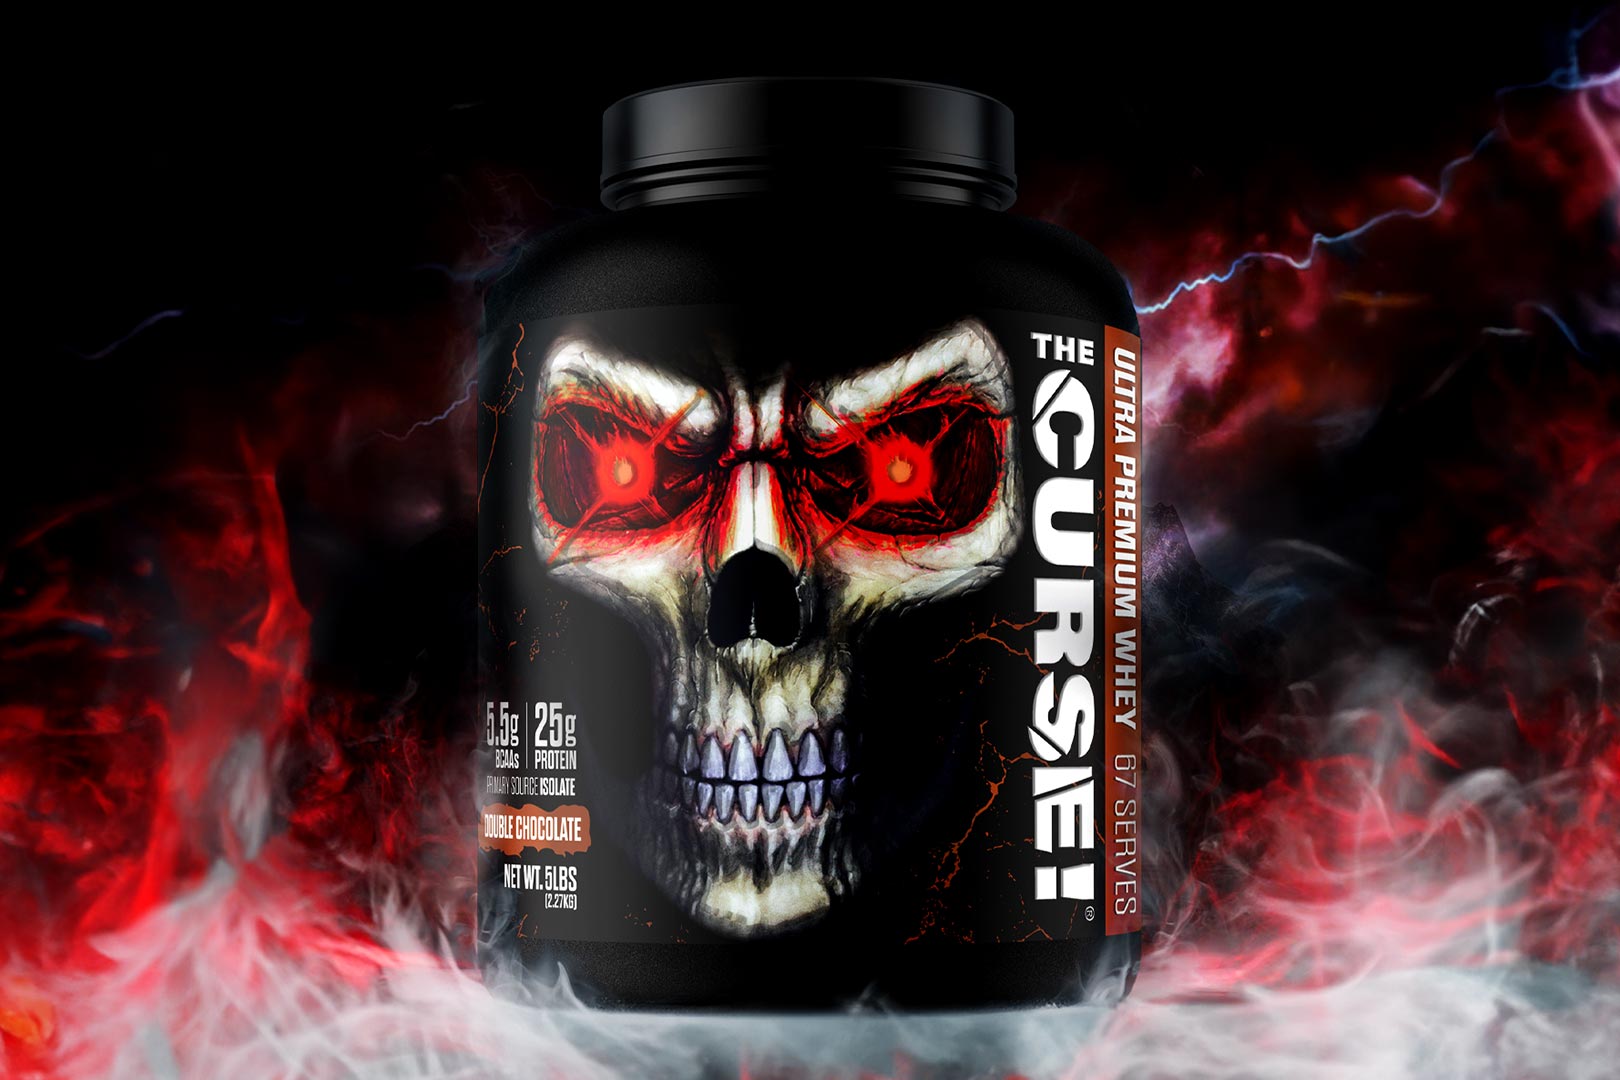 The Curse creator announces a blend-style competitor for the protein powder category